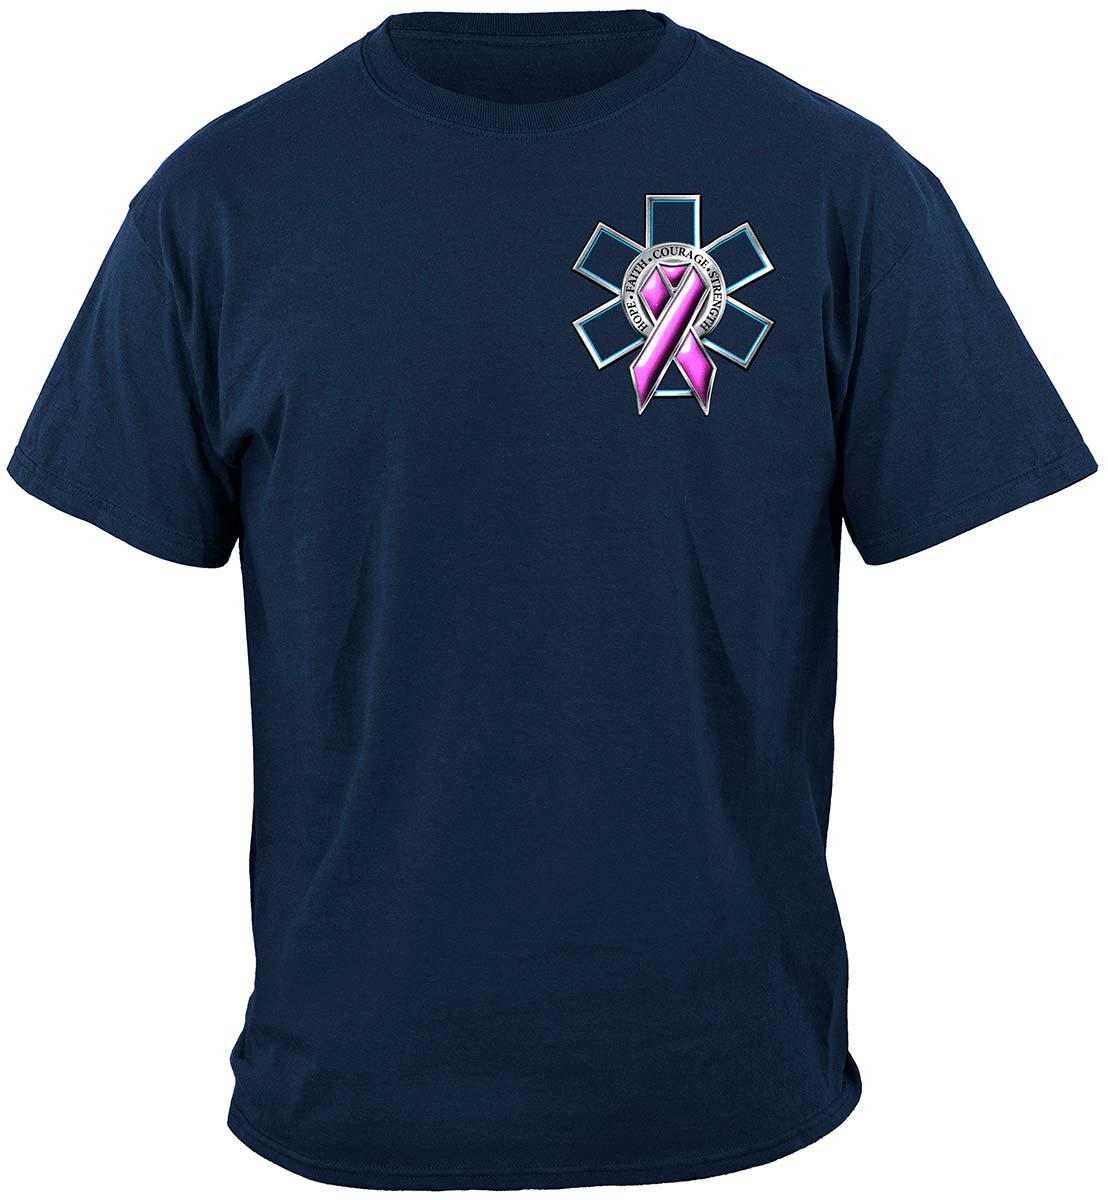 EMS Race For A Cure Premium Long Sleeves